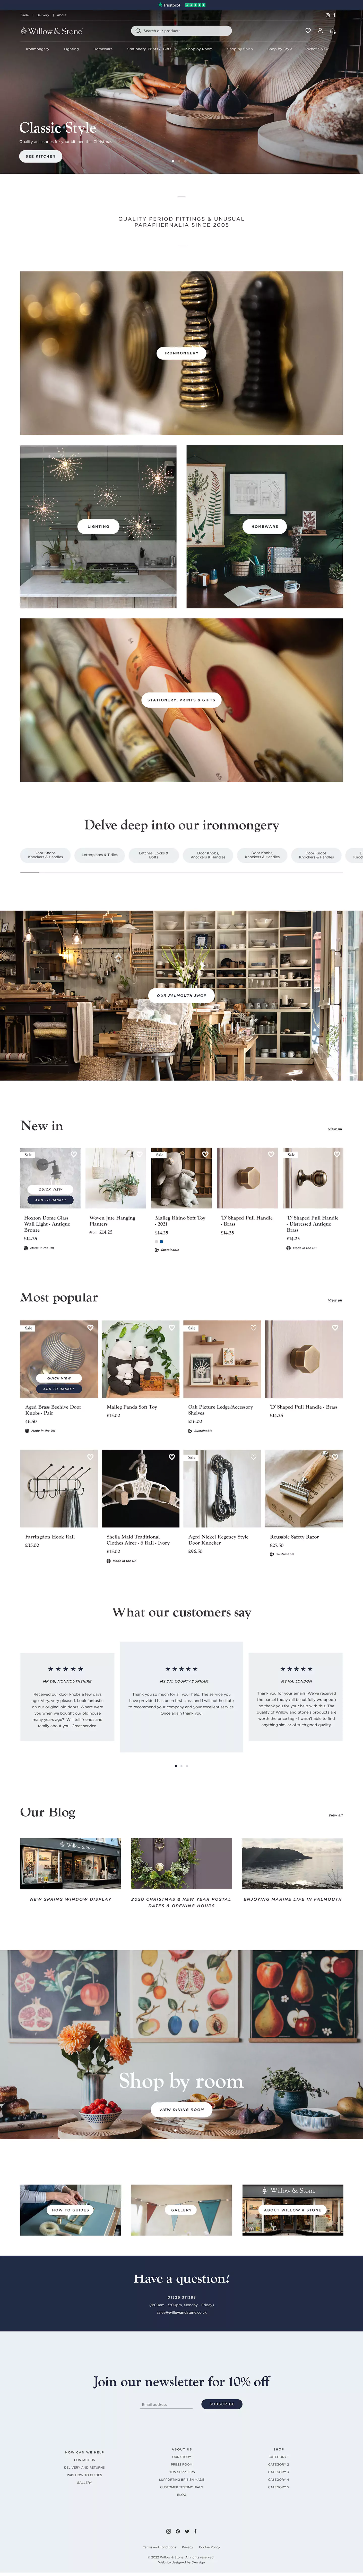 Willow & Stone Shopify website homepage design